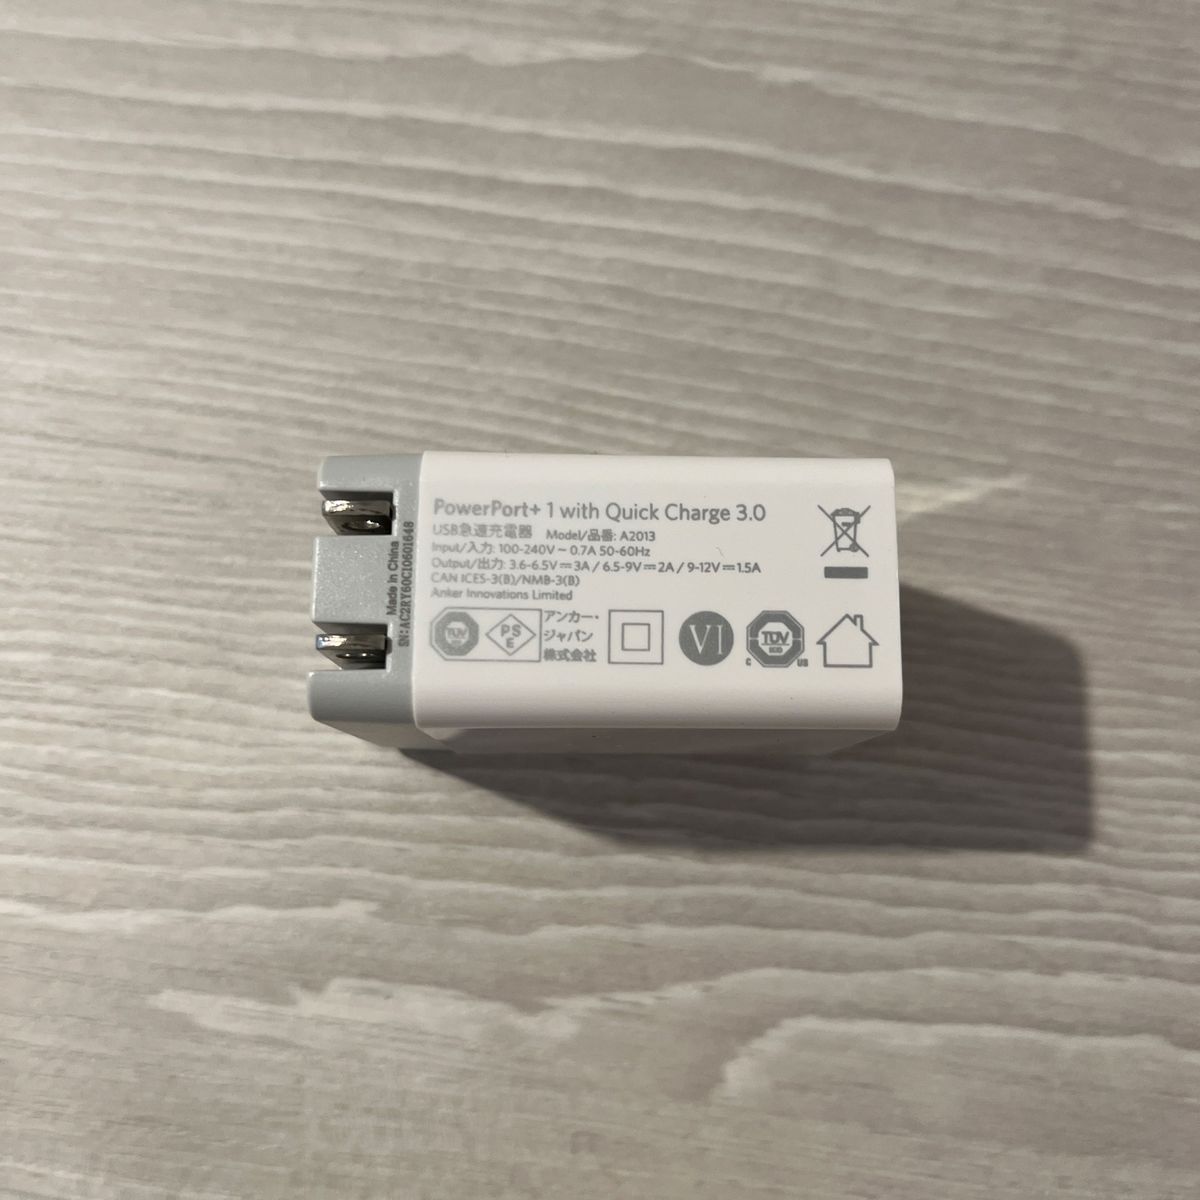 Anker PowerPort+1with quick charge 3.0